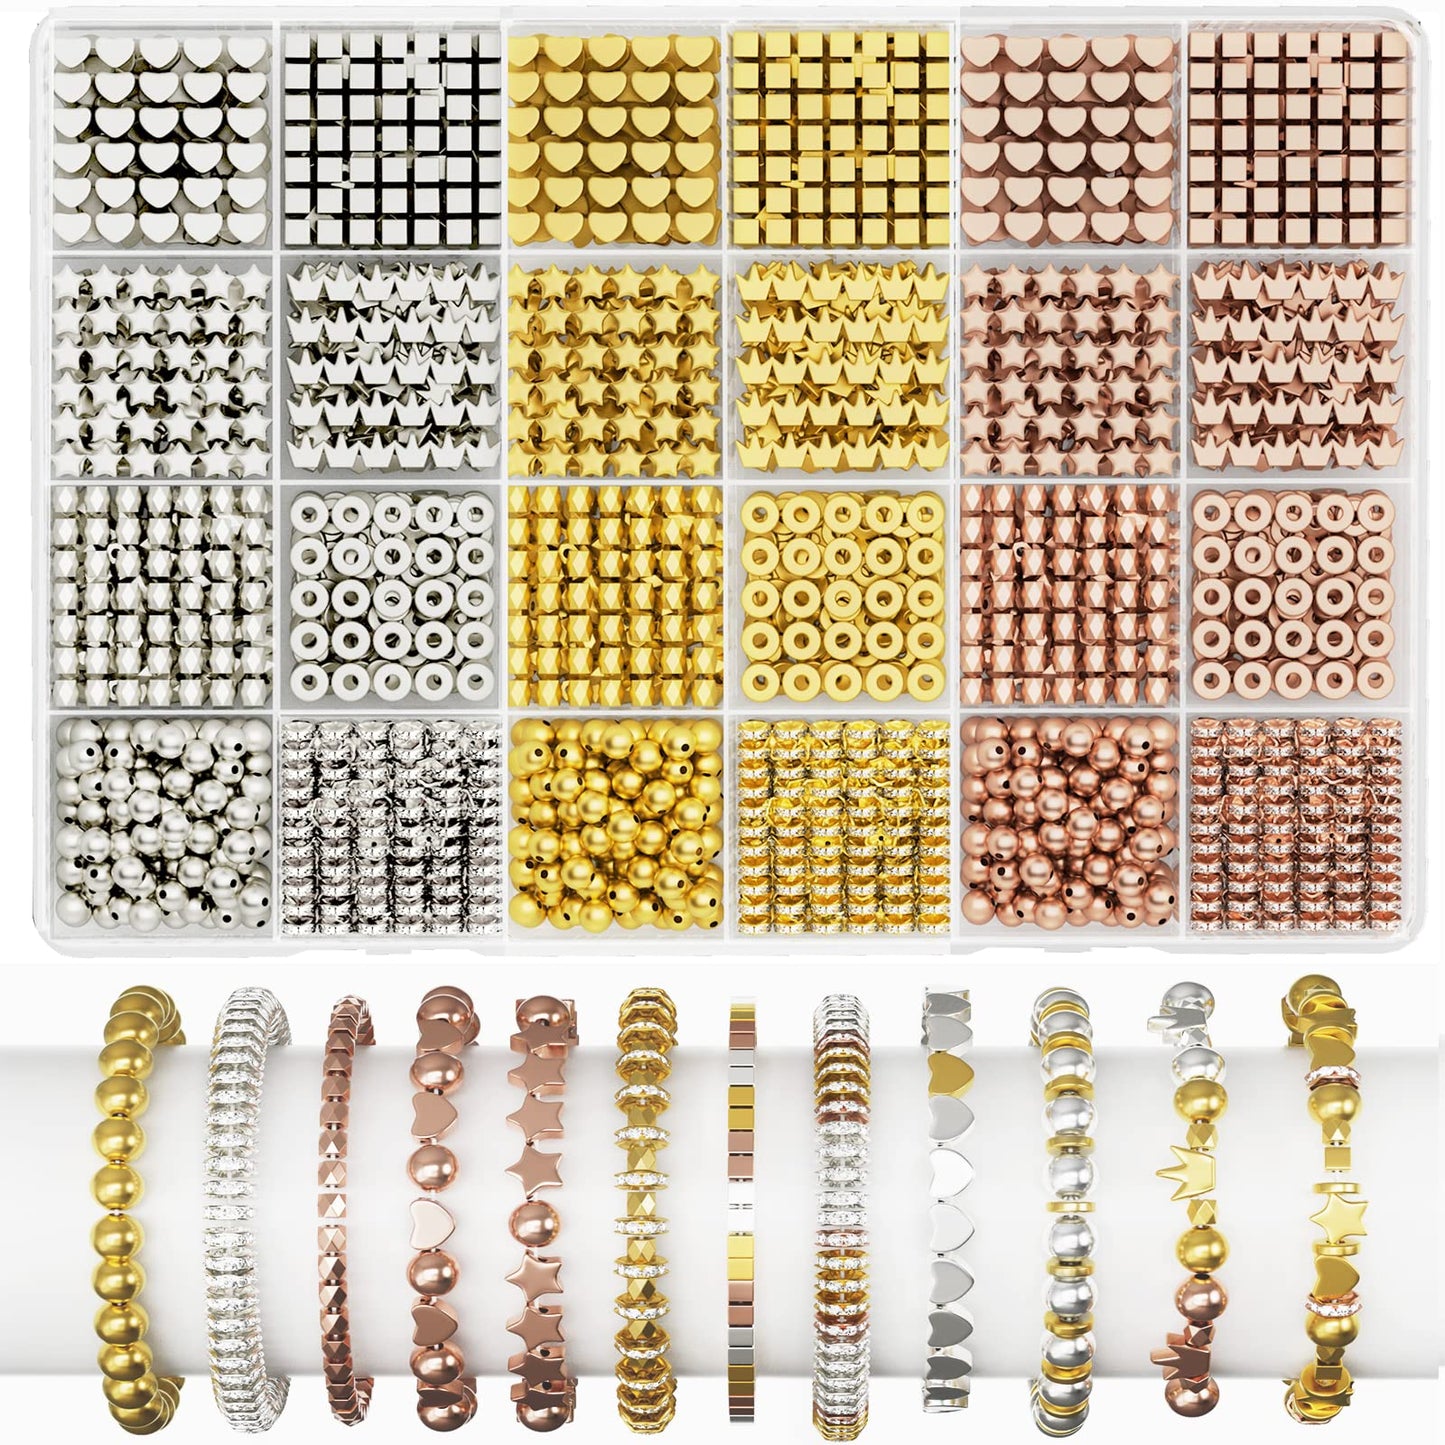 ARTDOT Gold Beads for Jewelry Bracelets Making, 1740 PCS 8 Styles Spacer Beads Kit (Gold, Sliver, Rose Gold)